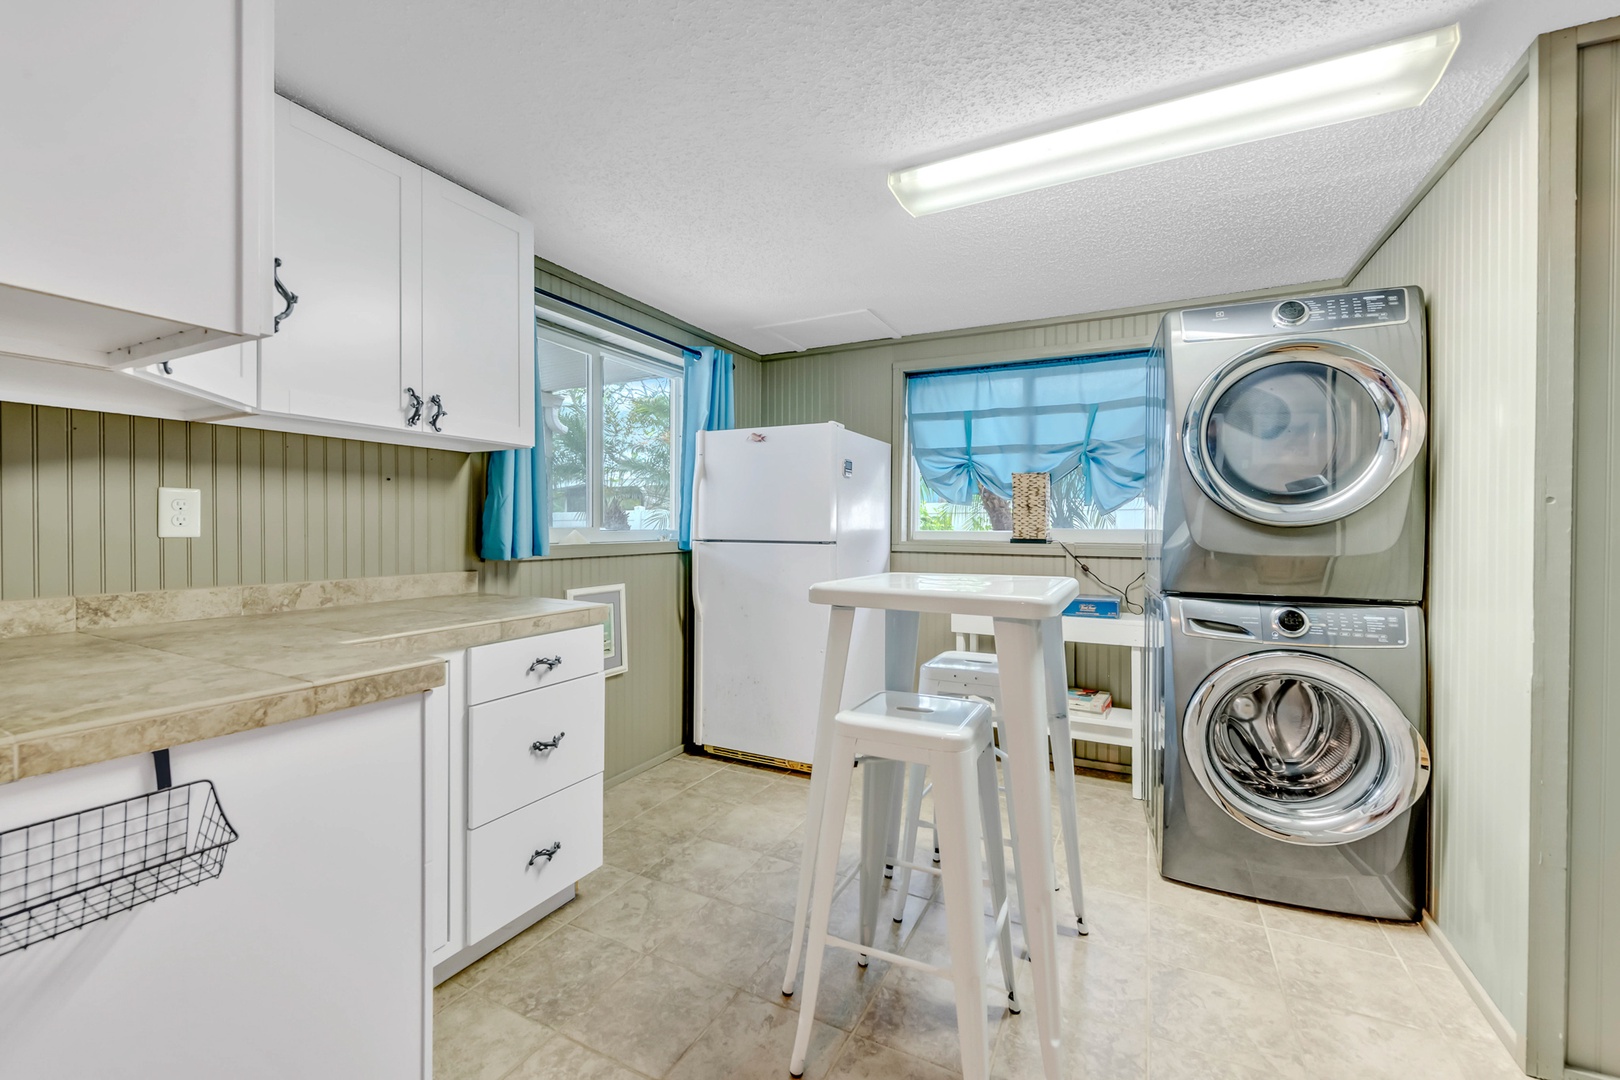 Kitchenette & Washer and Dryer